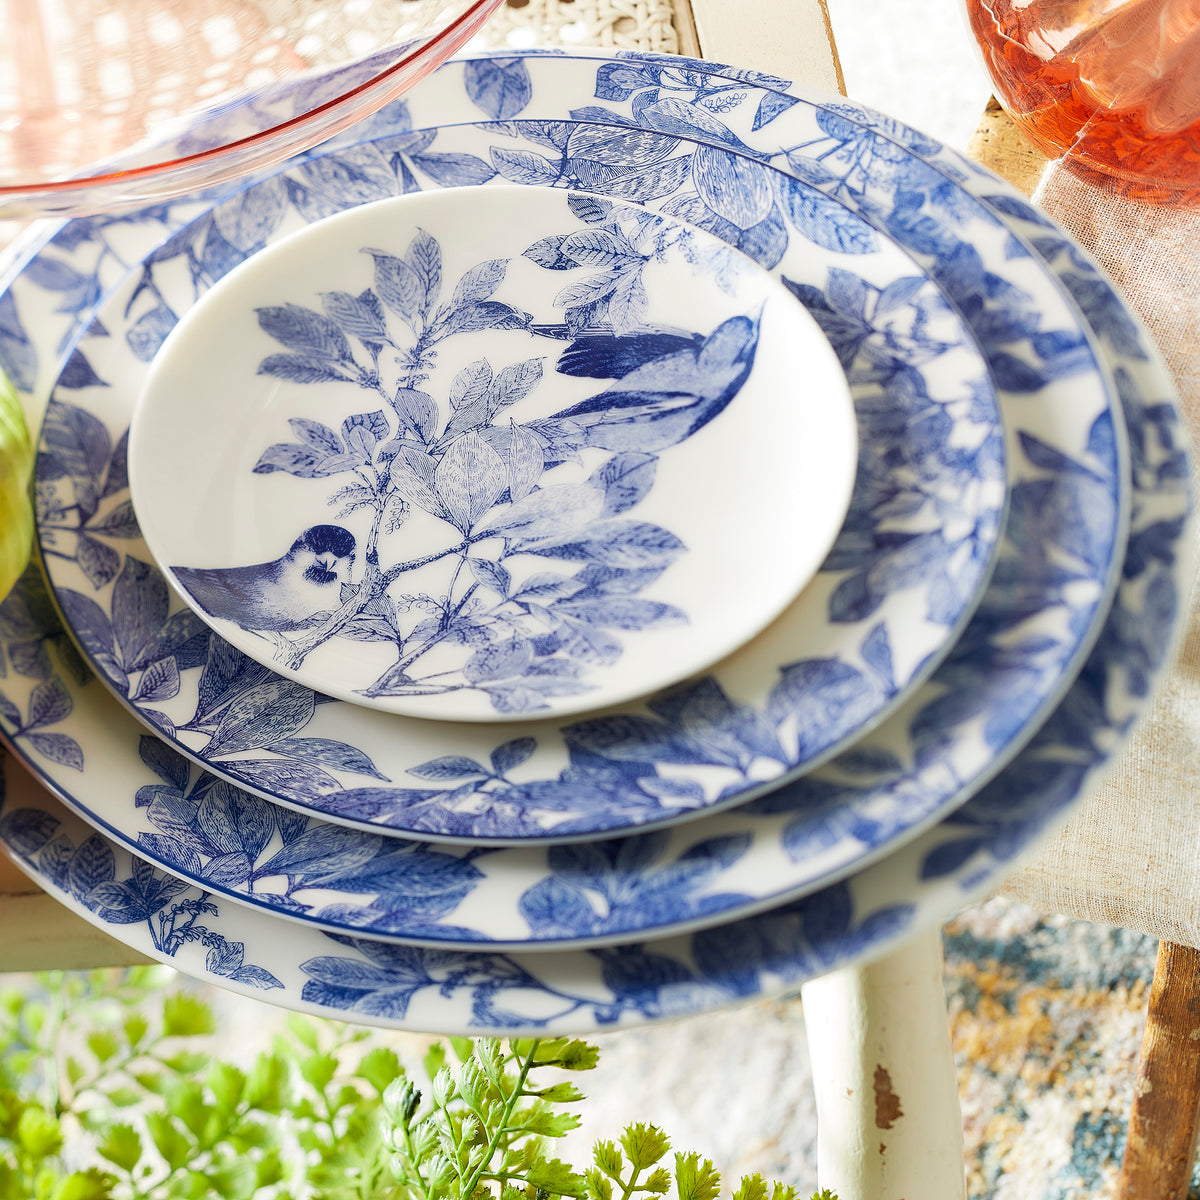 A stack of Arbor Blue Rimmed Dinner dinnerware by Caskata Artisanal Home with floral patterns on a table, with a glass and greenery in the background.